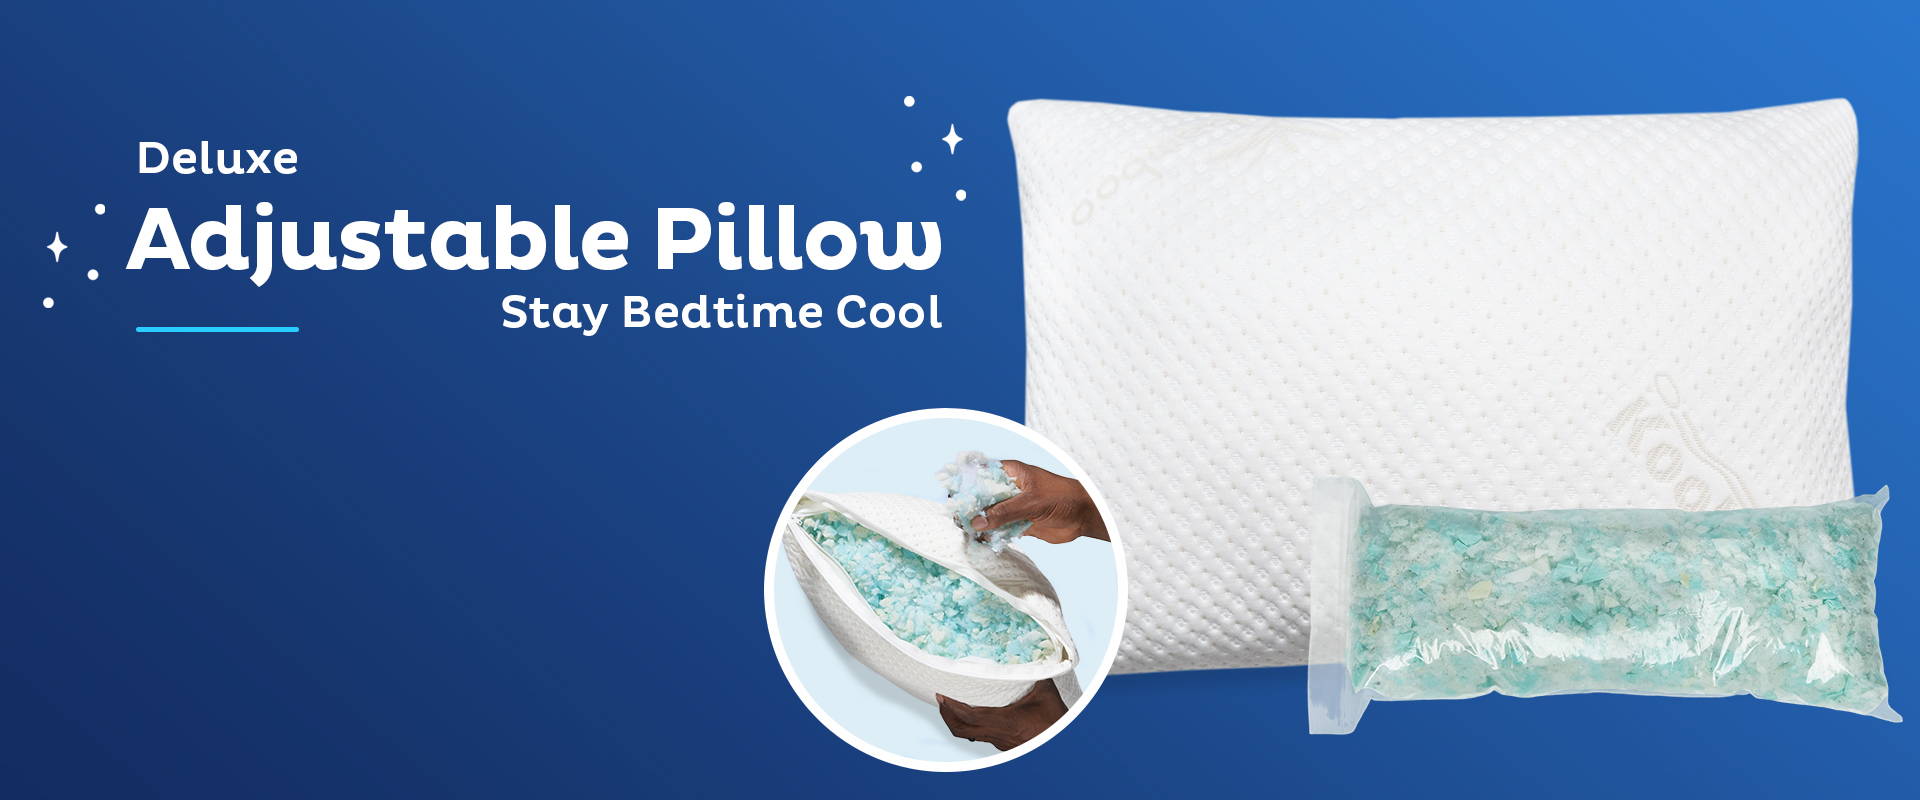 Snuggle-Pedic Adjustable Cooling Pillow - Shredded Memory Foam Pillows for Side, Stomach & Back Sleepers - Fluffy or Firm - Keeps Shape - College Dorm Room Essentials for Girls and Guys - Standard Adjustable Shredded Memory Foam Standard